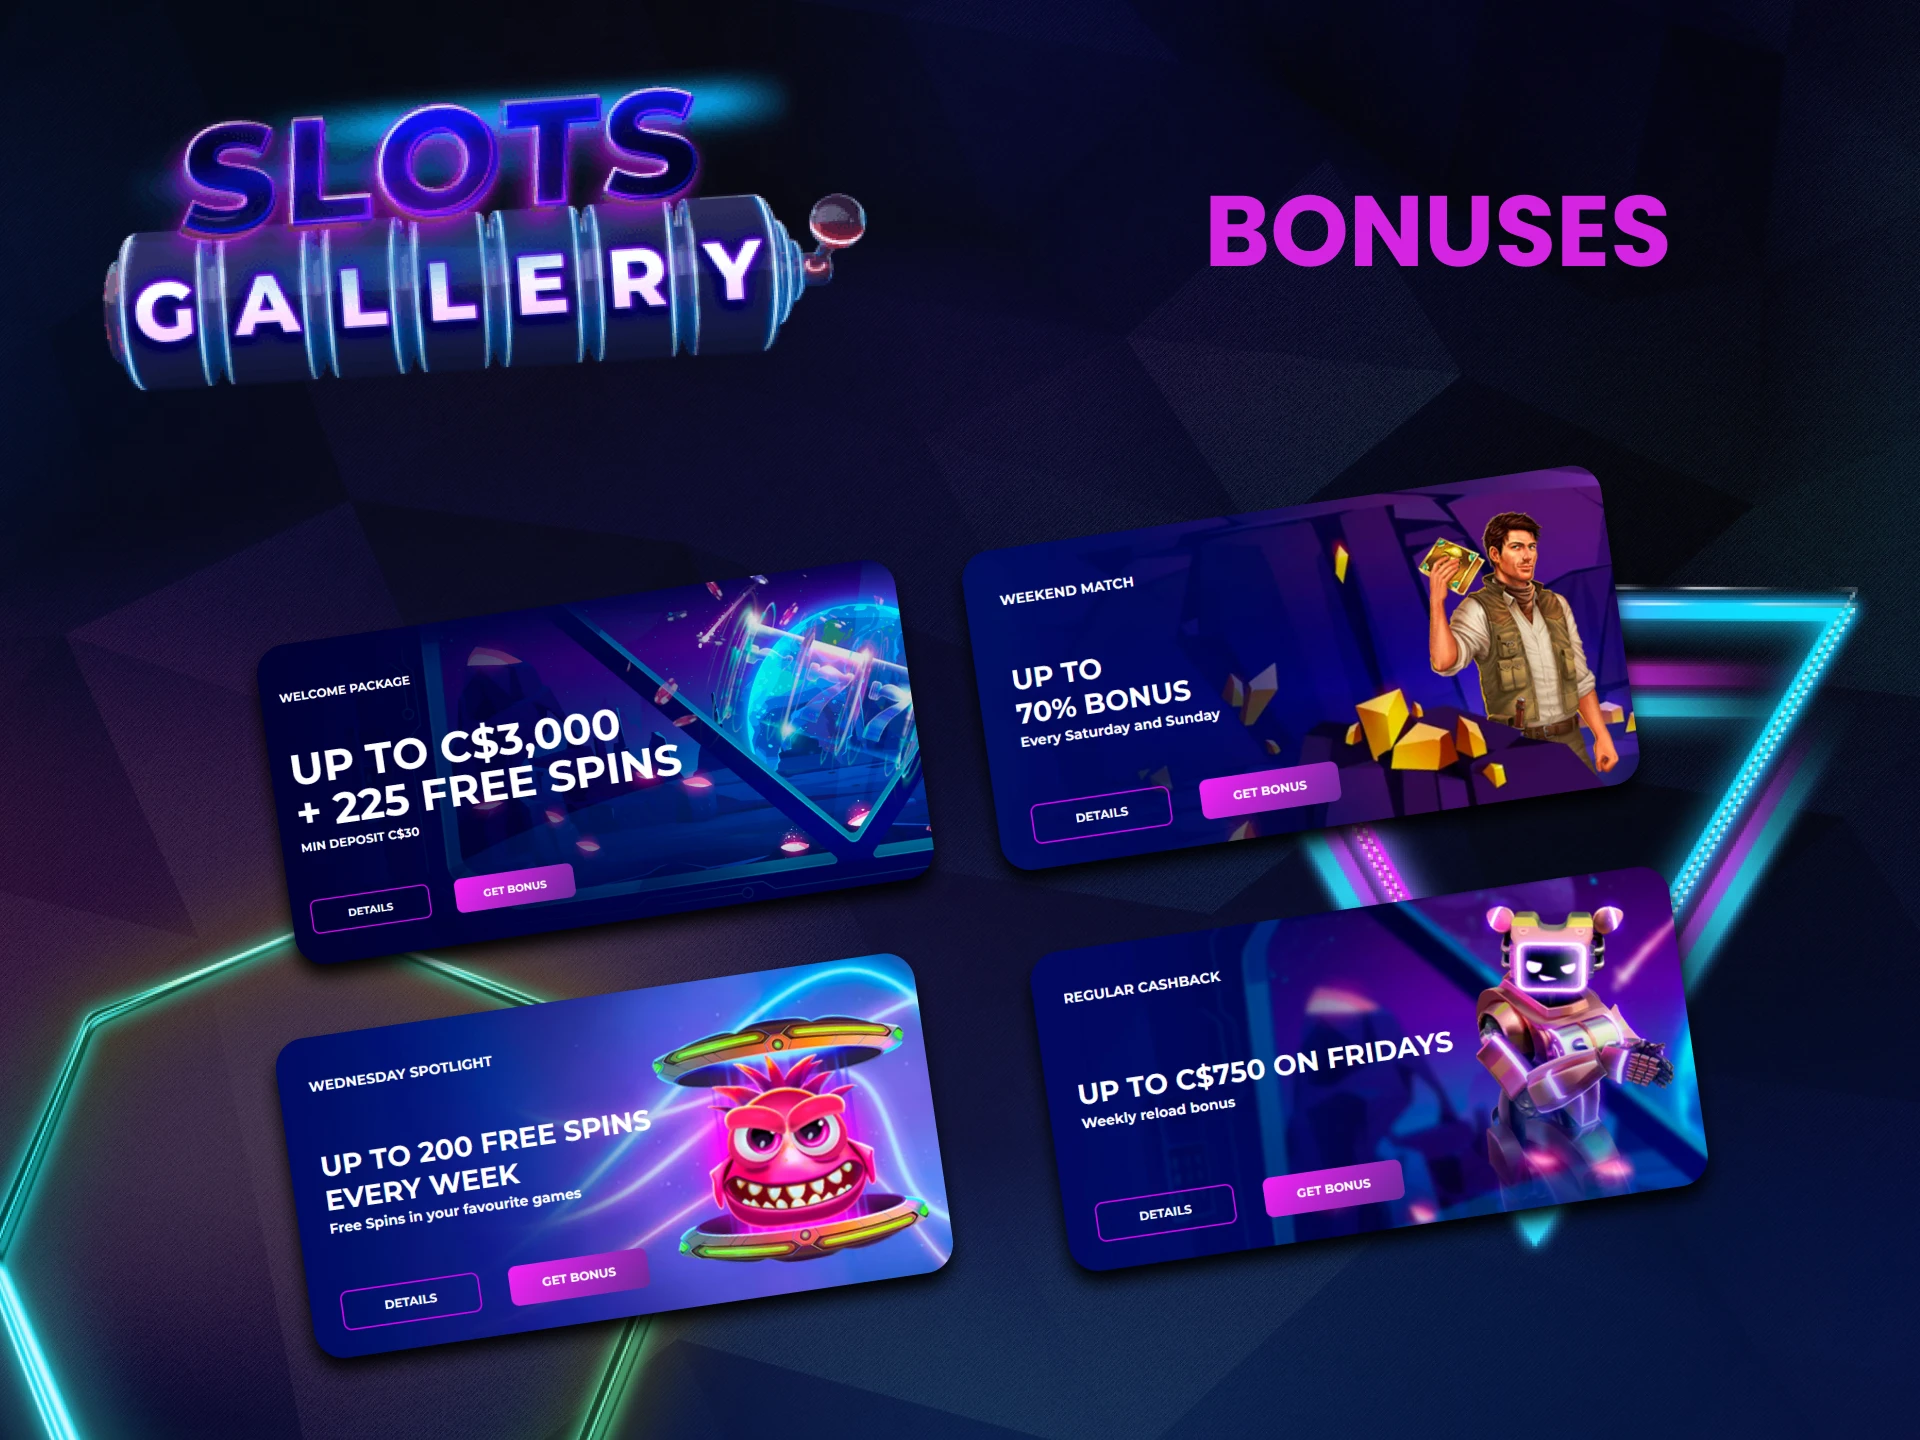 By playing mini games you receive bonuses from Slots Gallery.